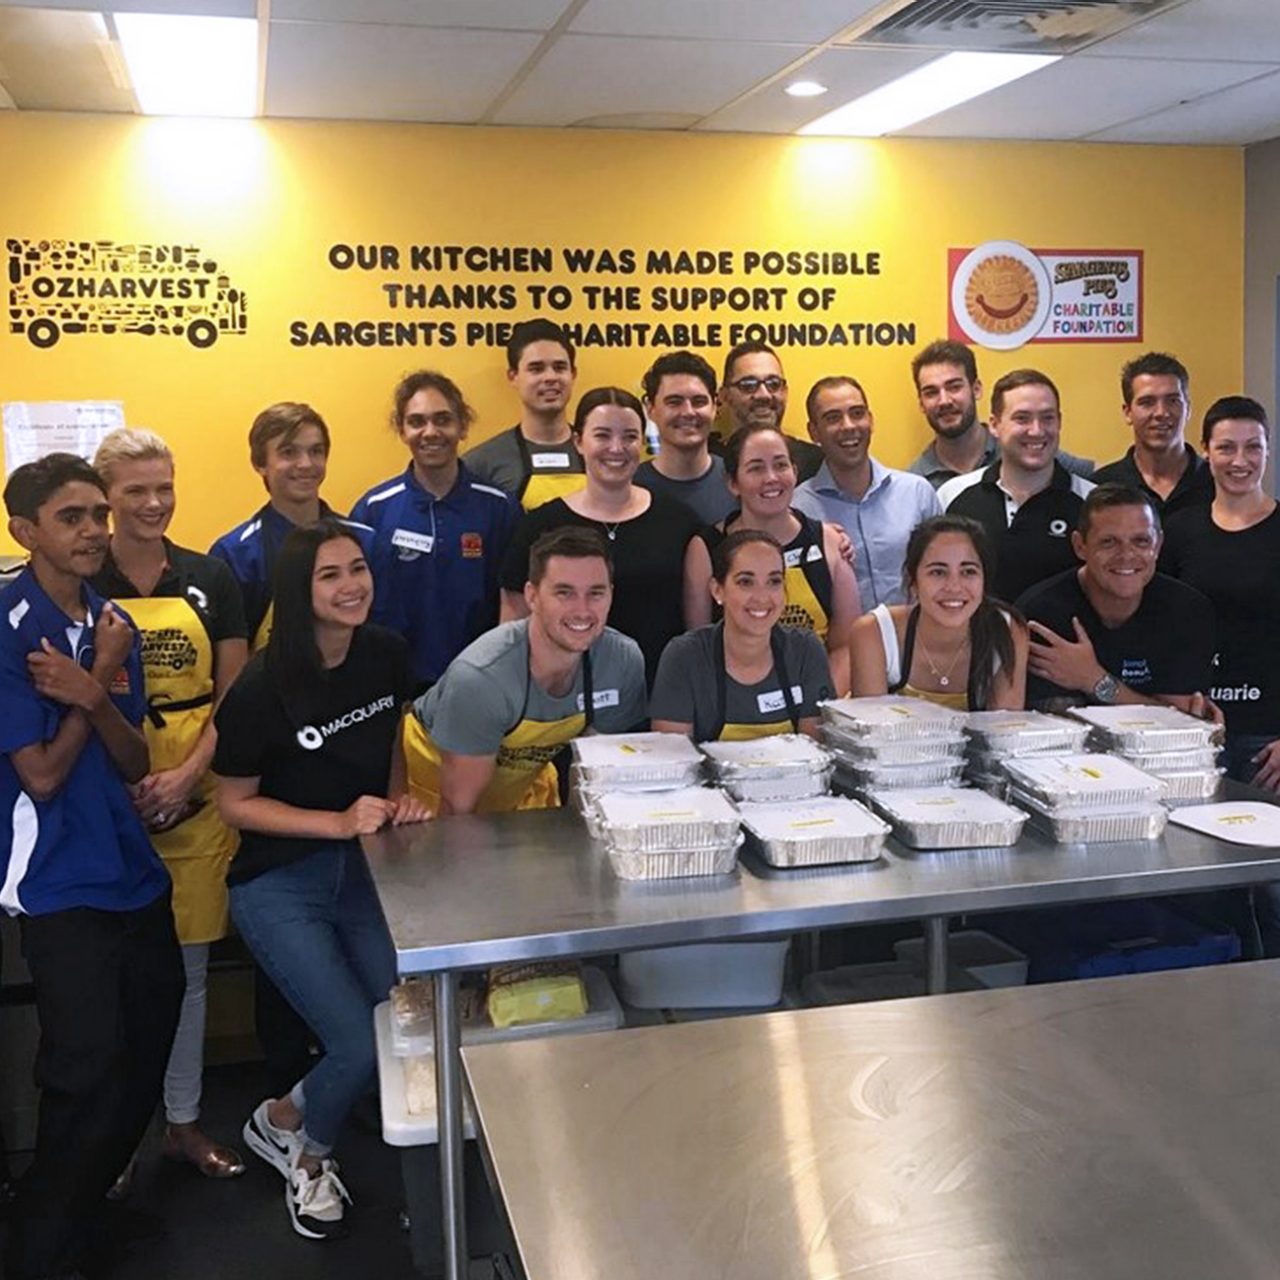 Brisbane staff volunteered with the Clontarf Foundation and OzHarvest, preparing food for the homeless